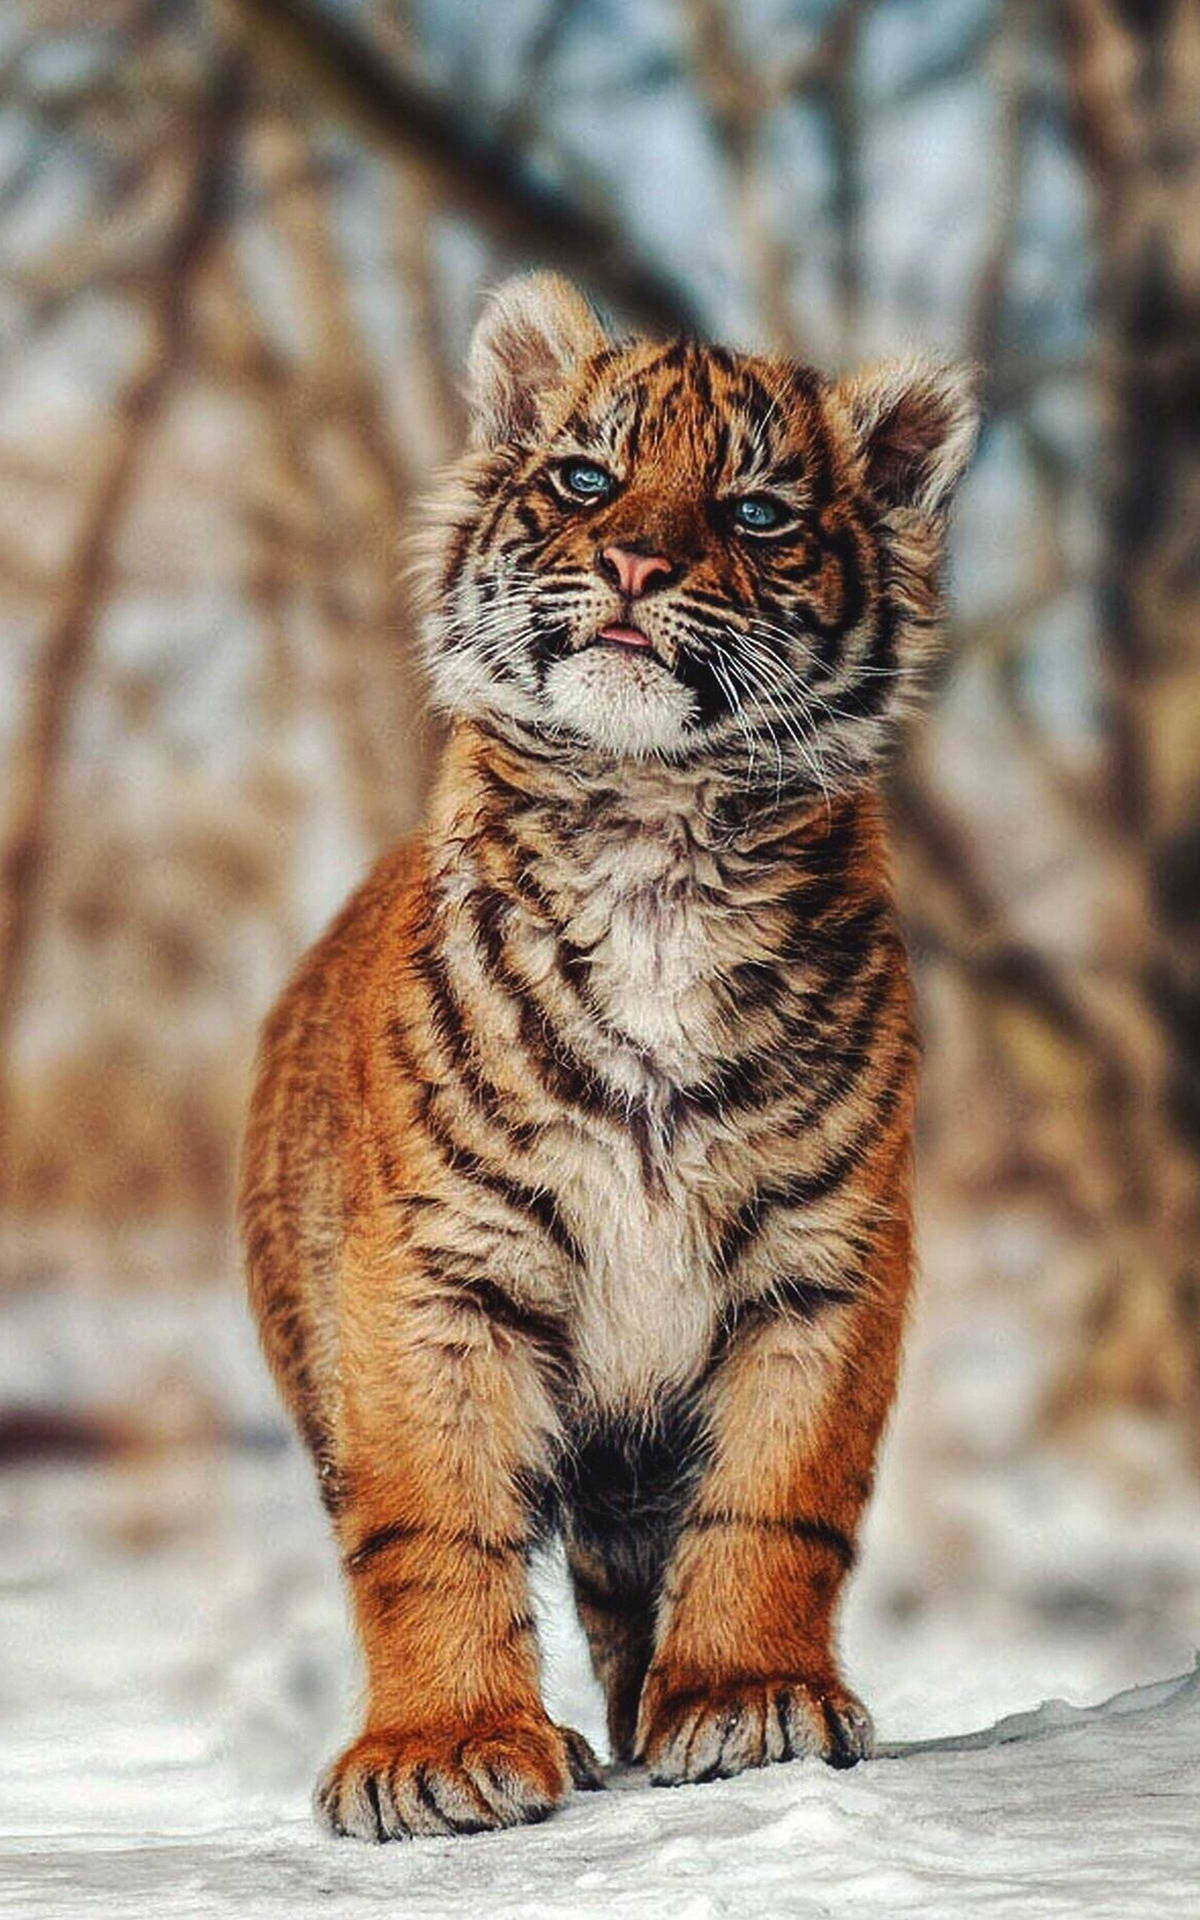 Baby Tiger In Snow Wallpaper